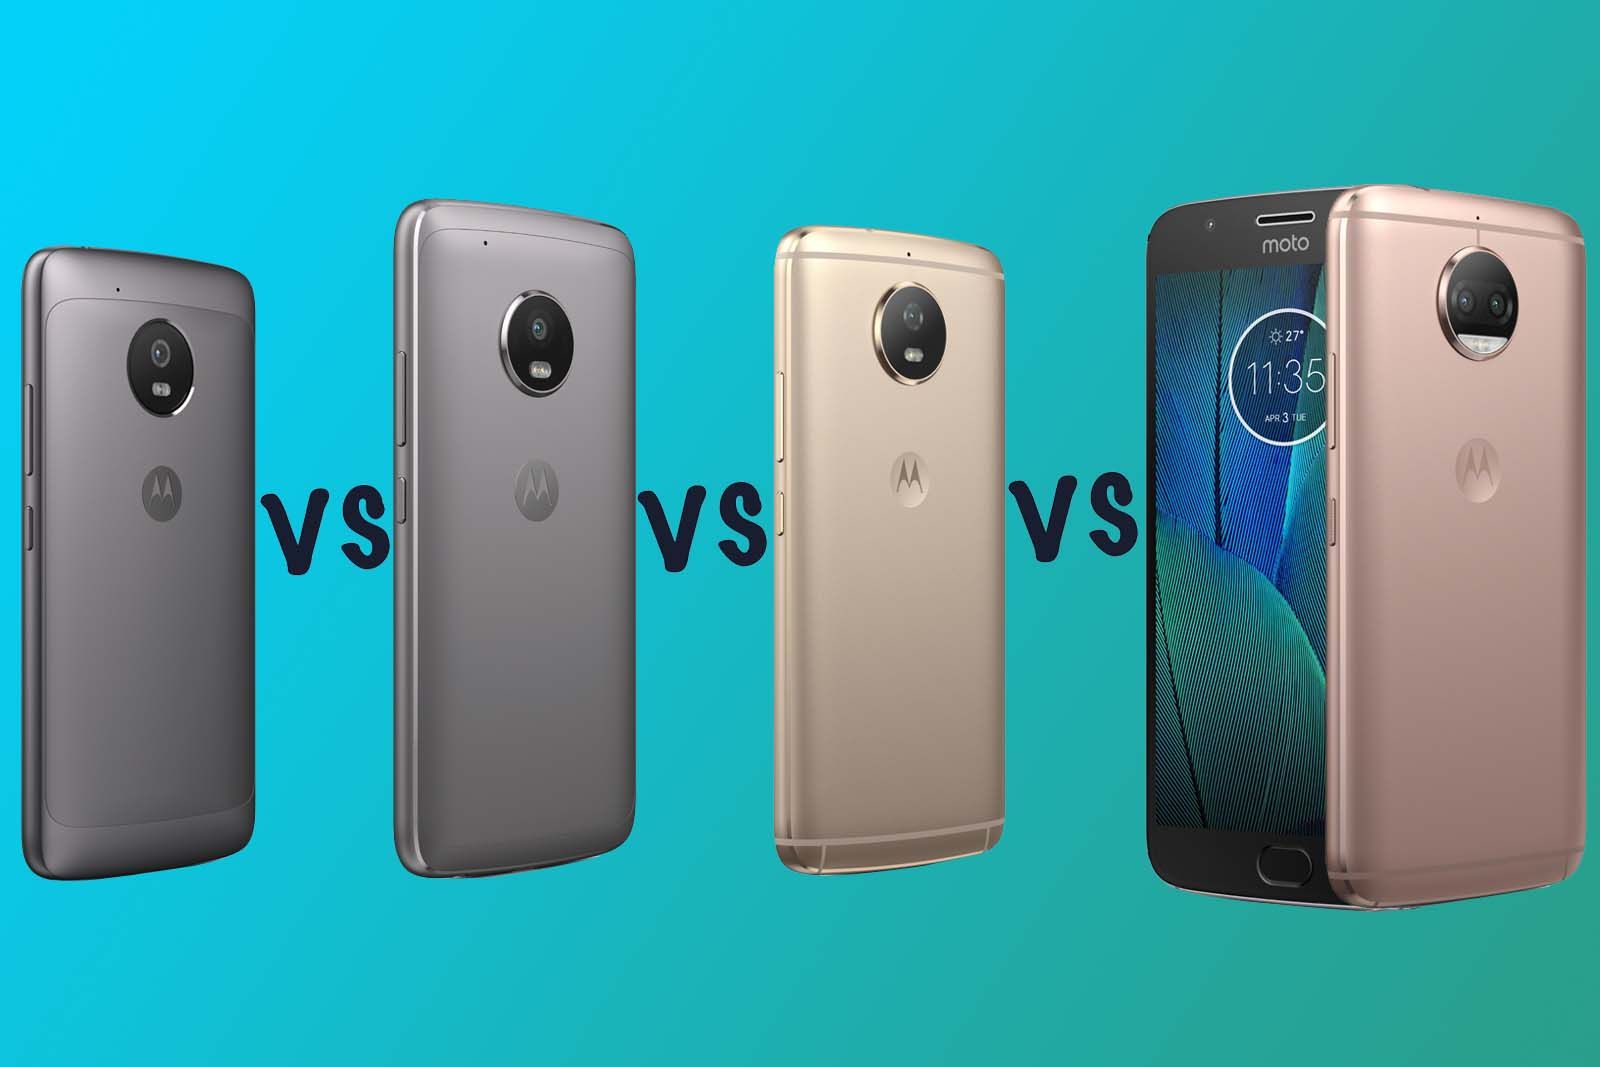 Motorola Moto G5 Vs G5 Plus What S The Difference image 1